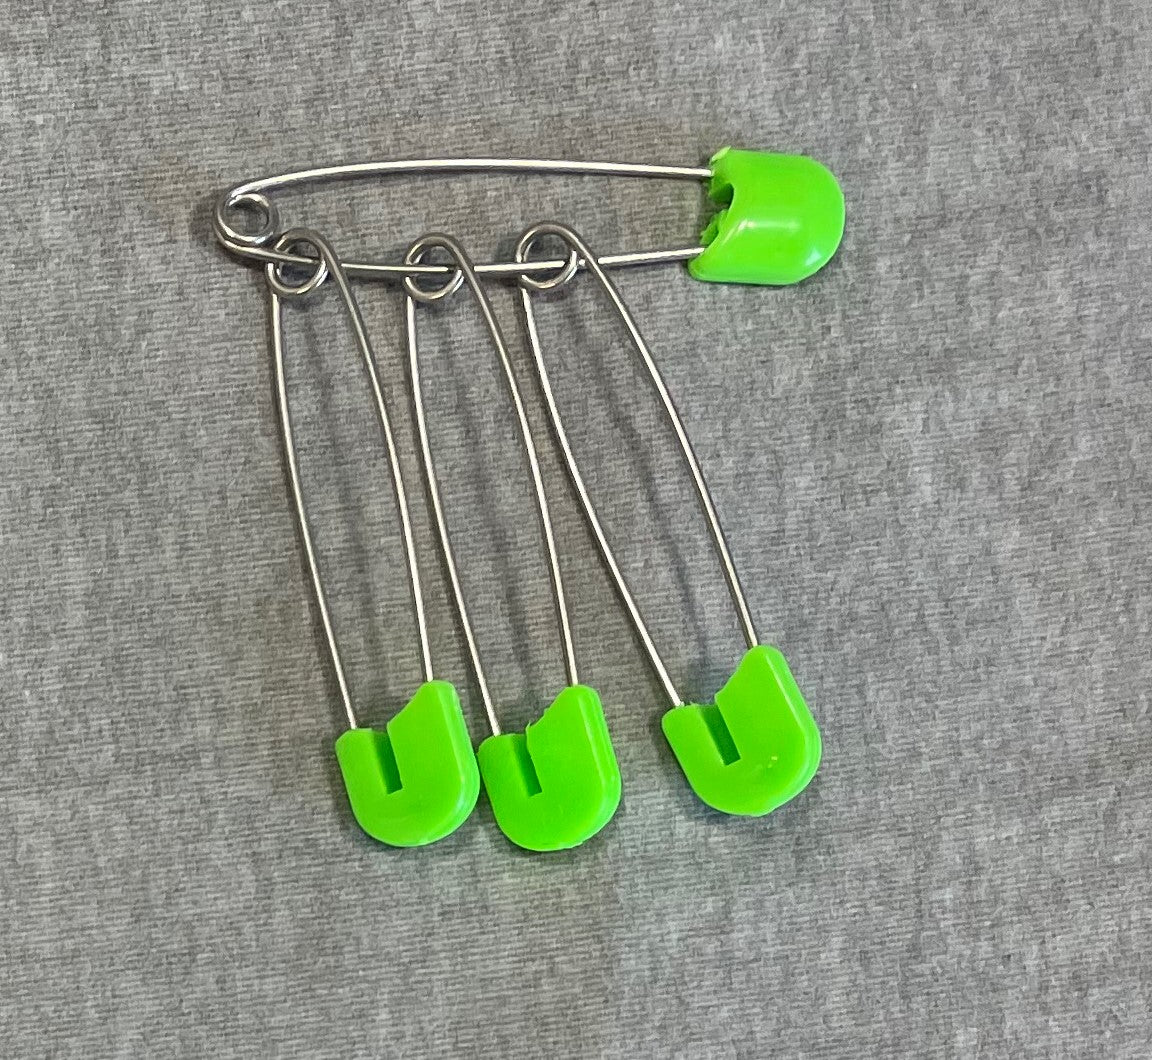 24 PC Baby Diaper Pins Safety Pin Lock Cloth Changing Locking Clip Multi Colors